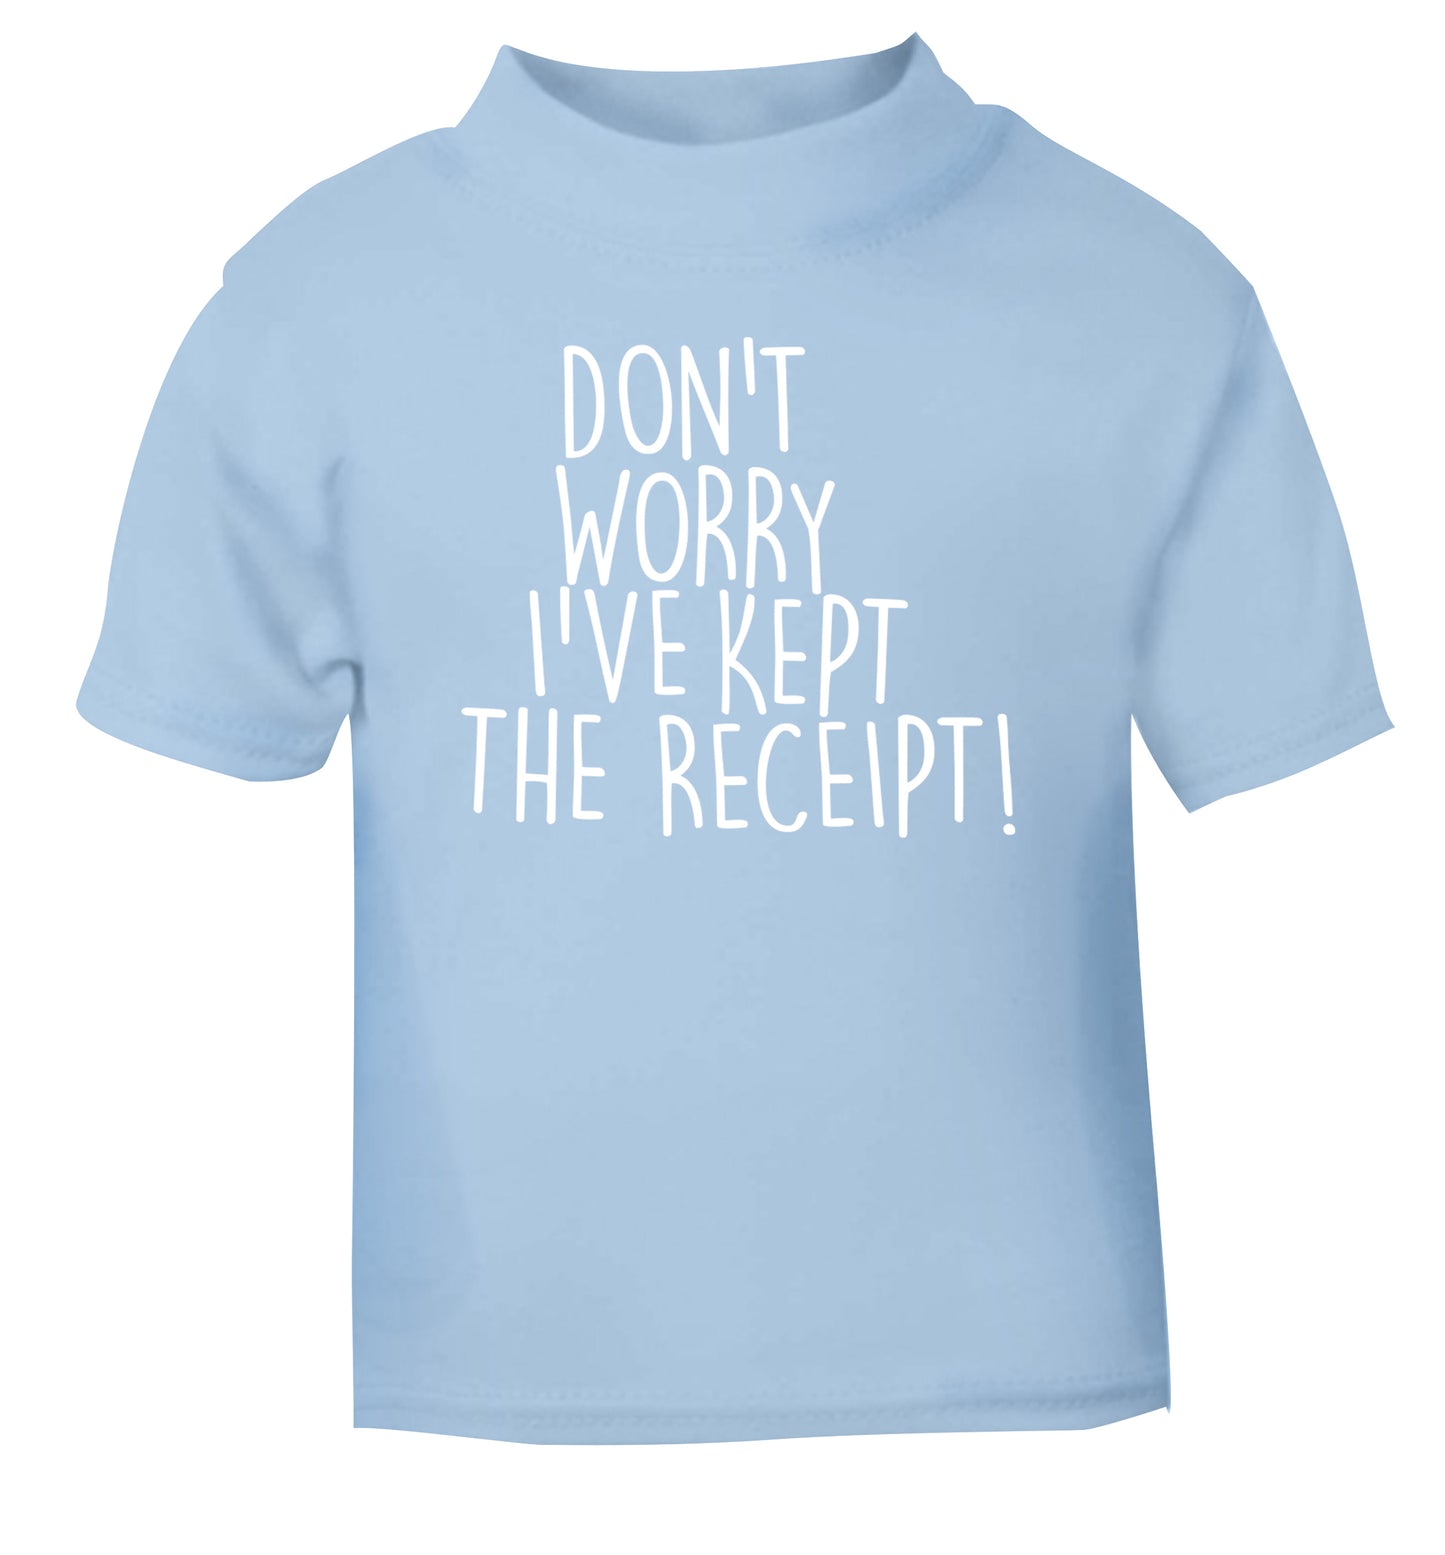 Don't Worry I've Kept the Receipt light blue Baby Toddler Tshirt 2 Years